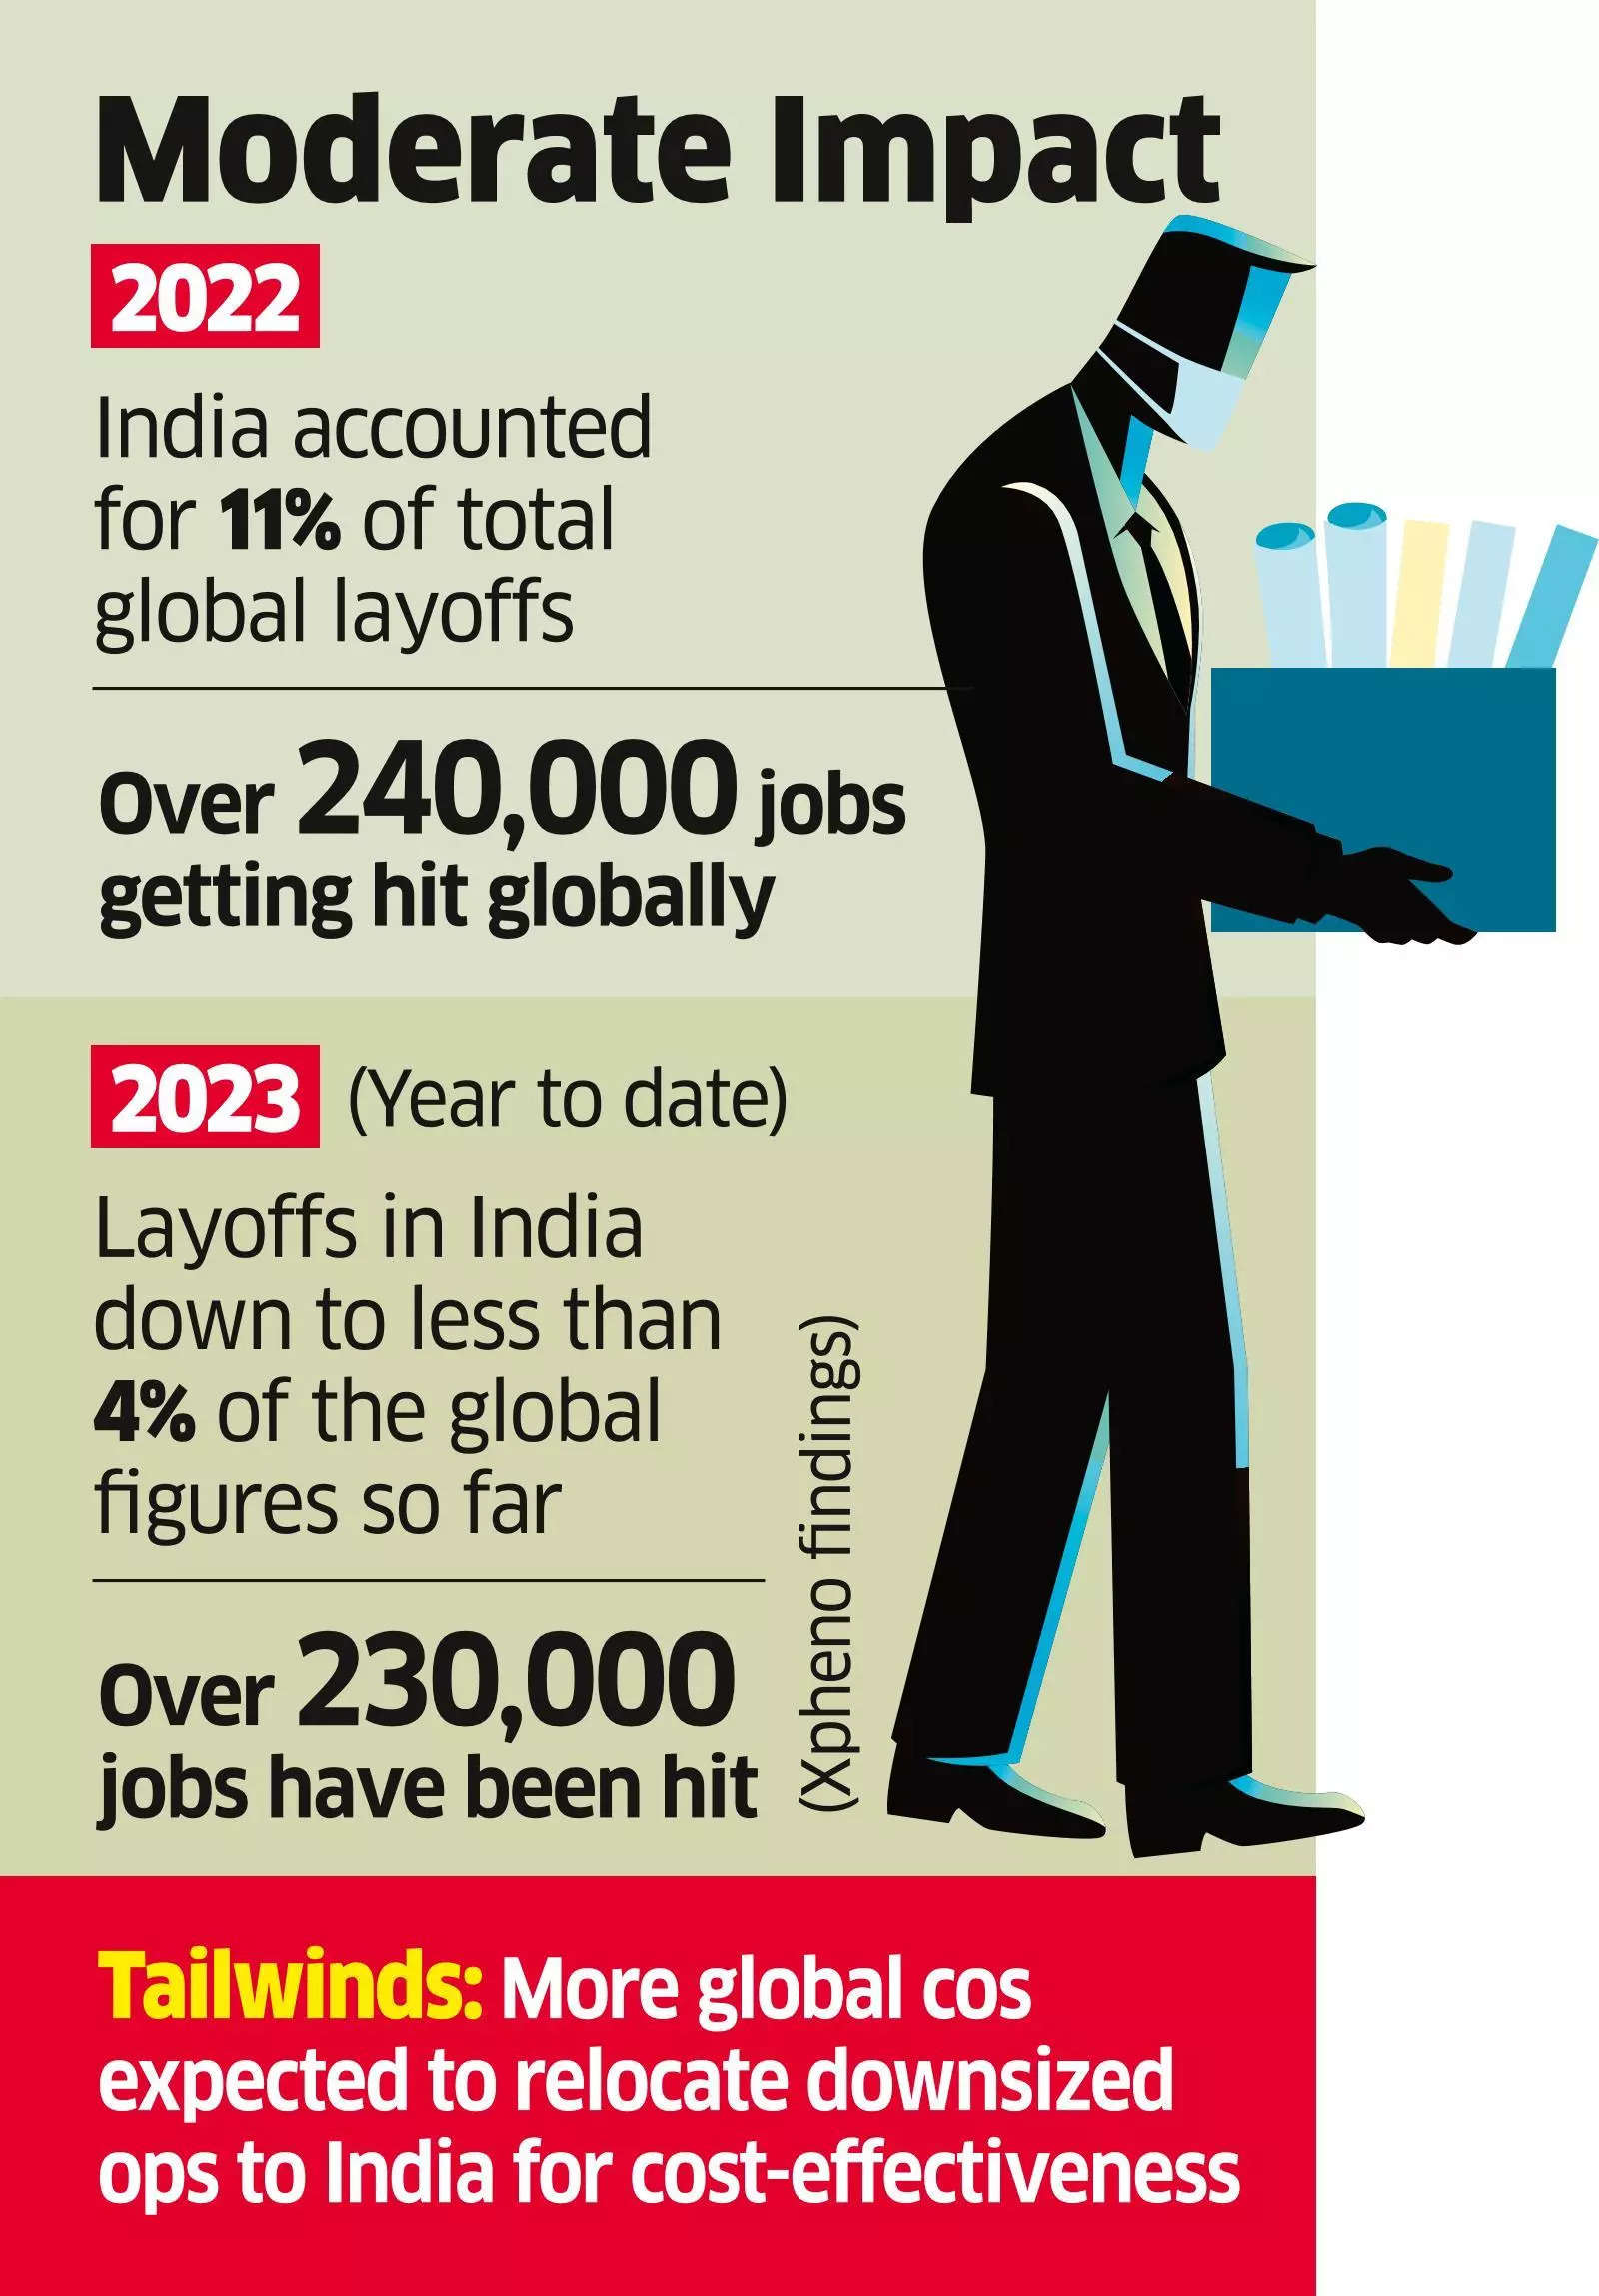 Job Cuts in India Just a Small Fraction of Global Layoffs